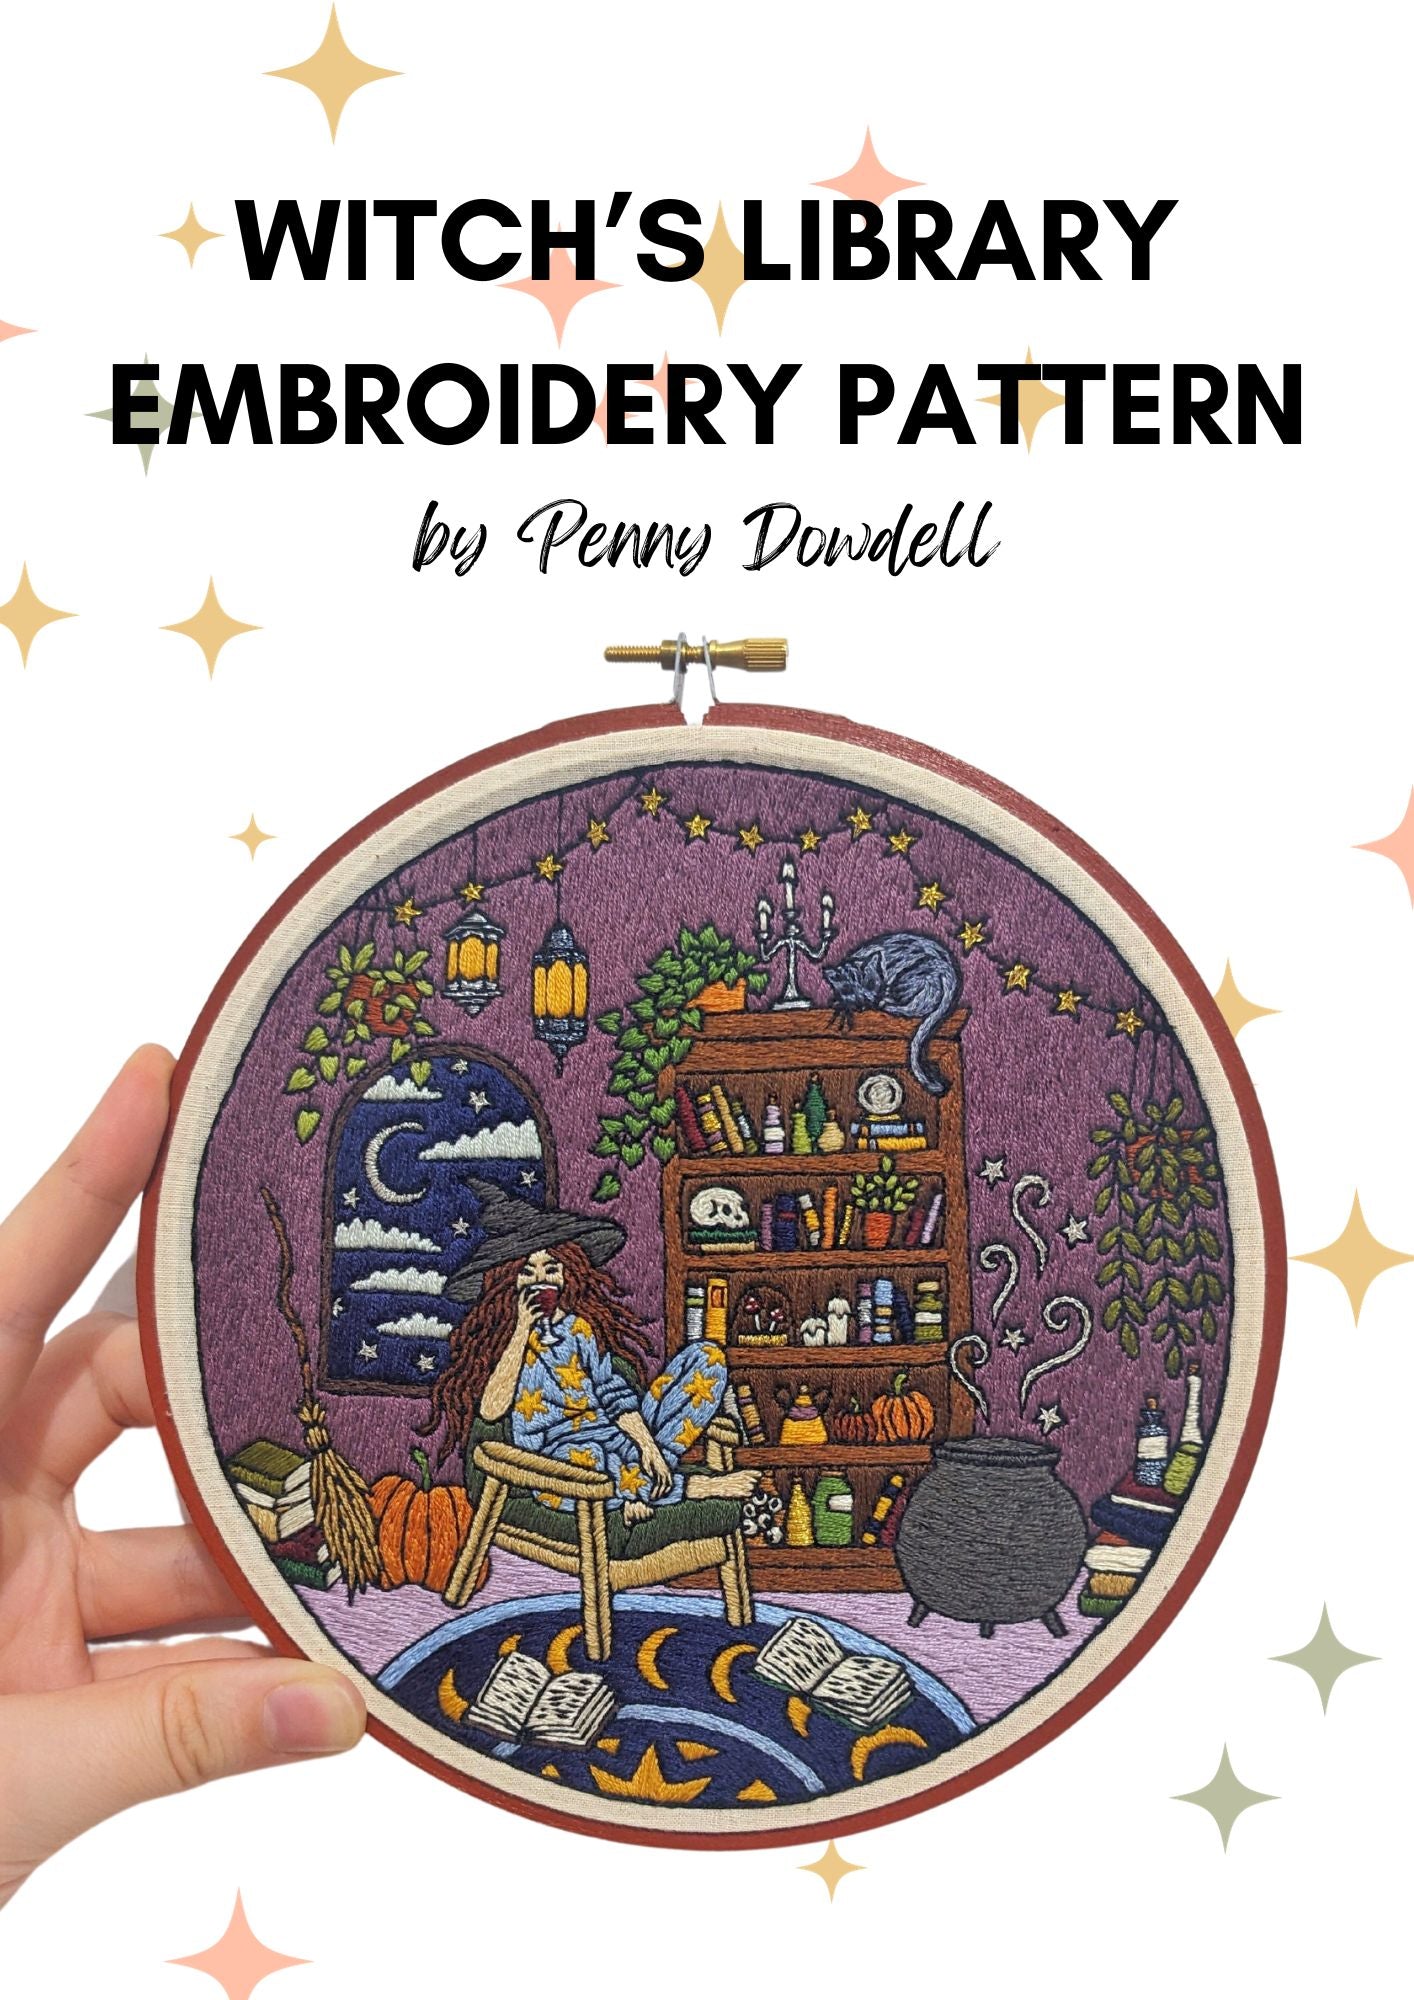 Witch's Library Embroidery PDF PATTERN DOWNLOAD